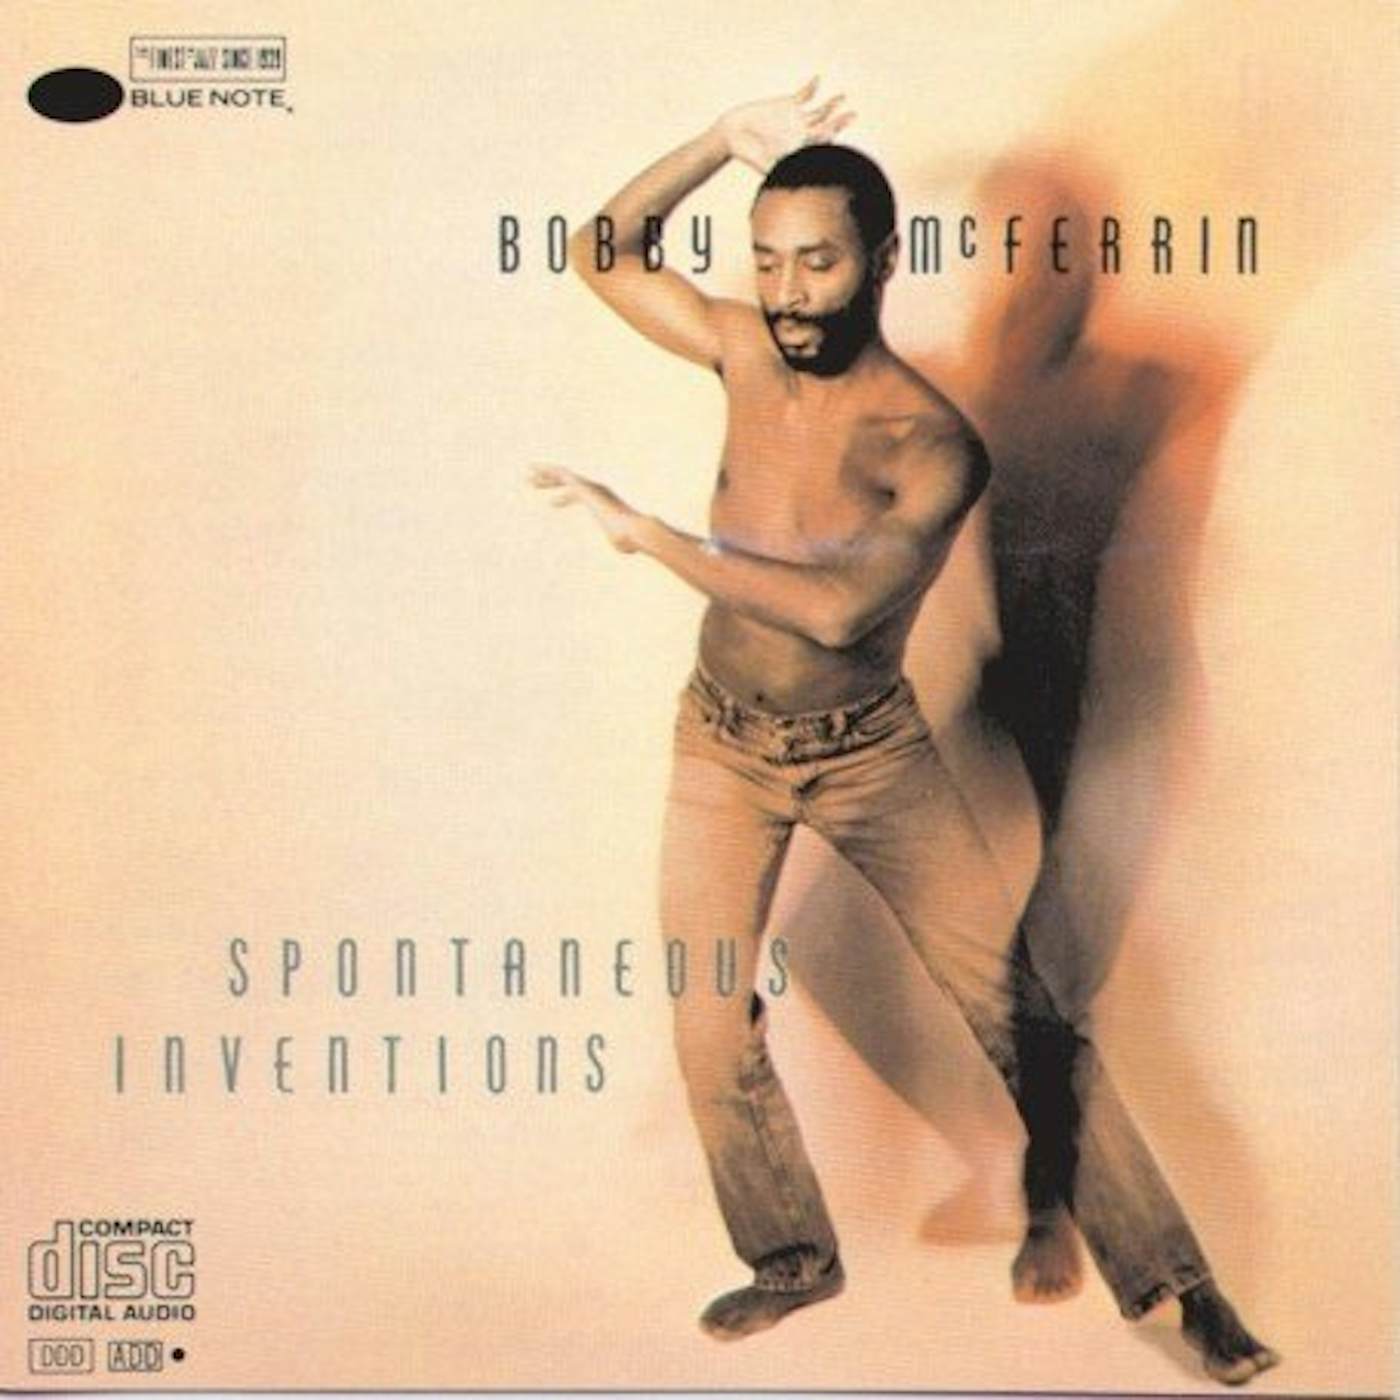 Bobby McFerrin SPONTANEOUS INVENTIONS CD